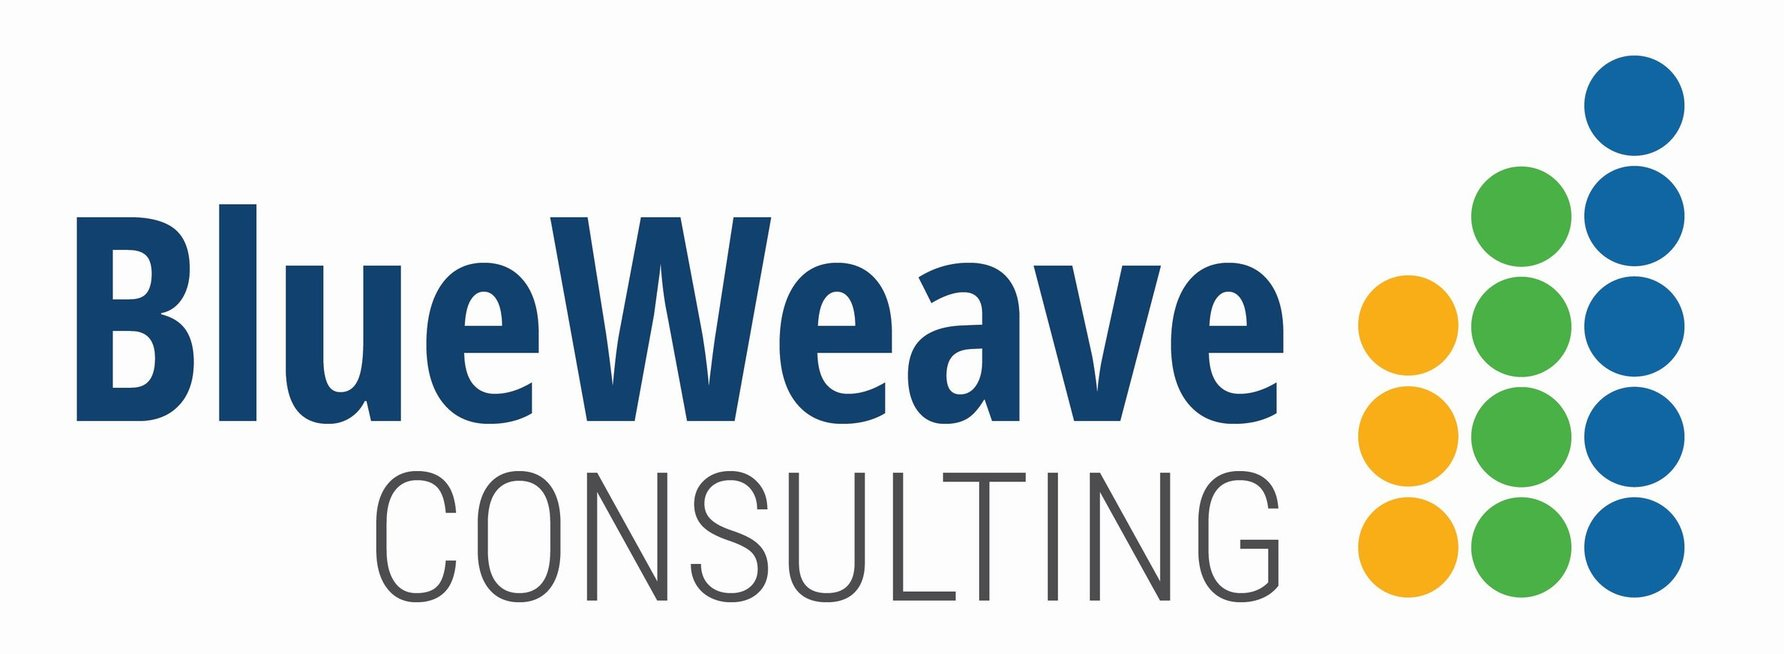 BLUEWEAVE CONSULTING & RESEARCH PVT LTD. Logo